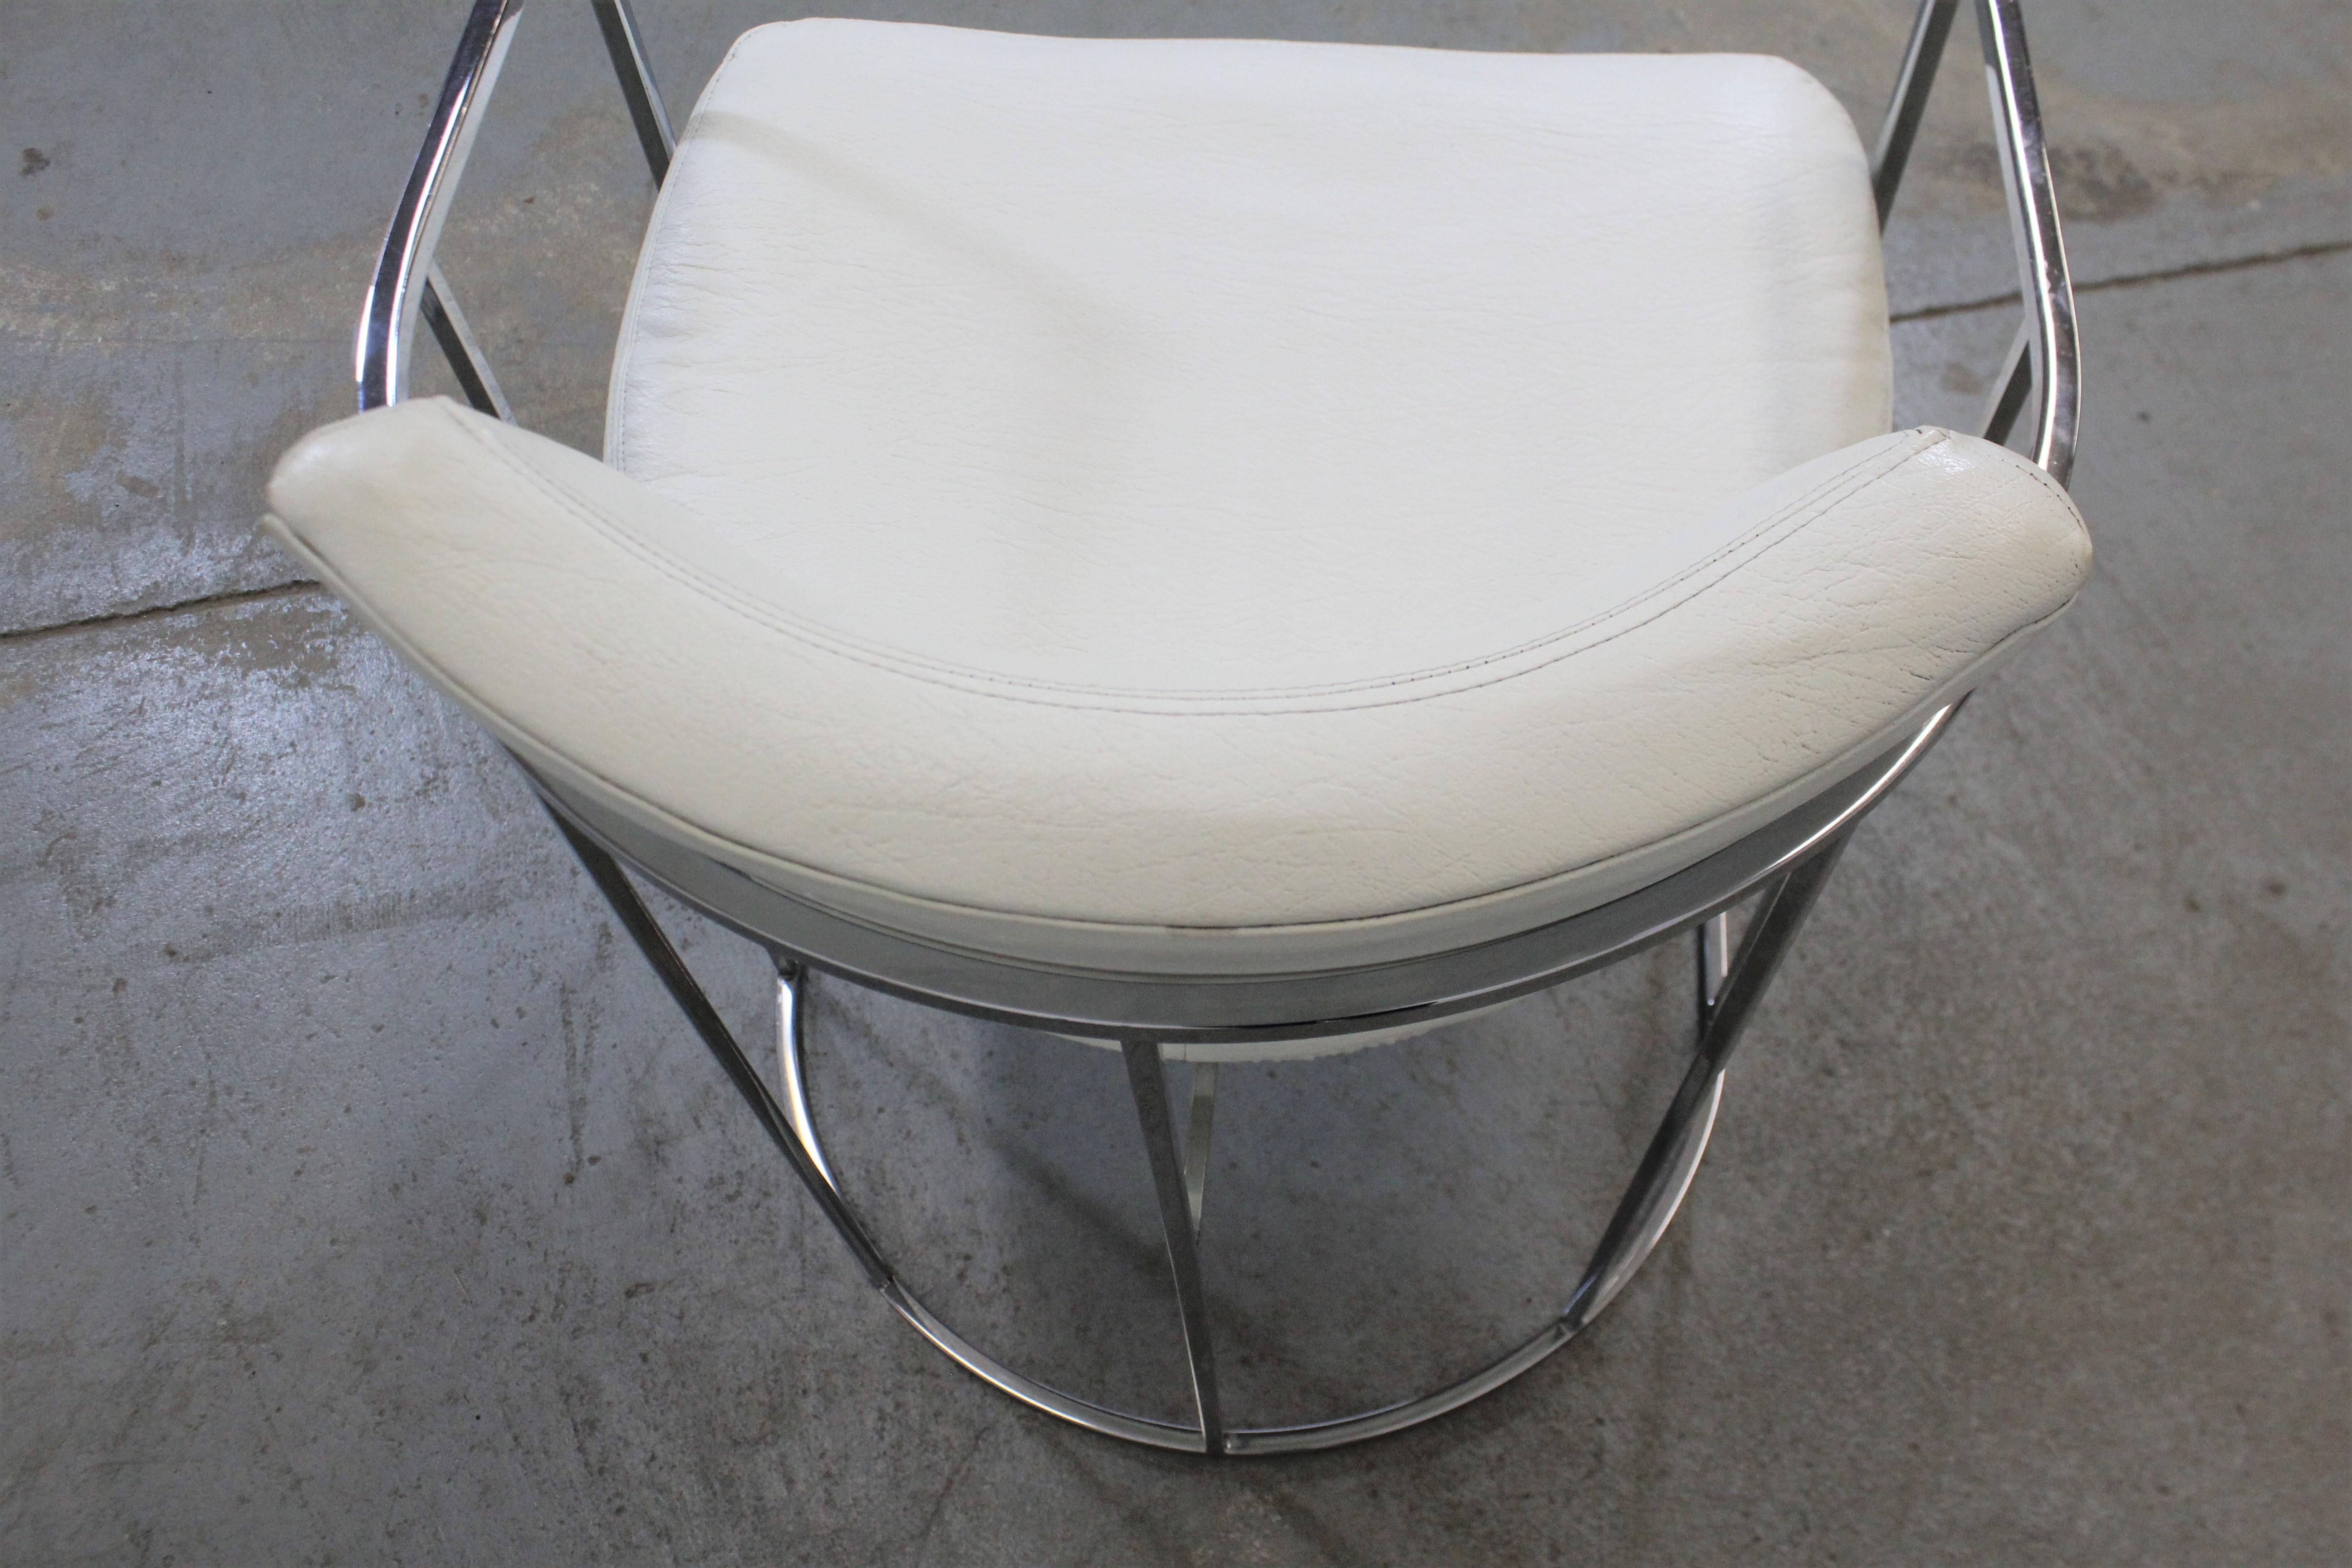 Pair of Mid-Century Modern Milo Baughman for Thayer Coggin Chrome Dining Chairs 1